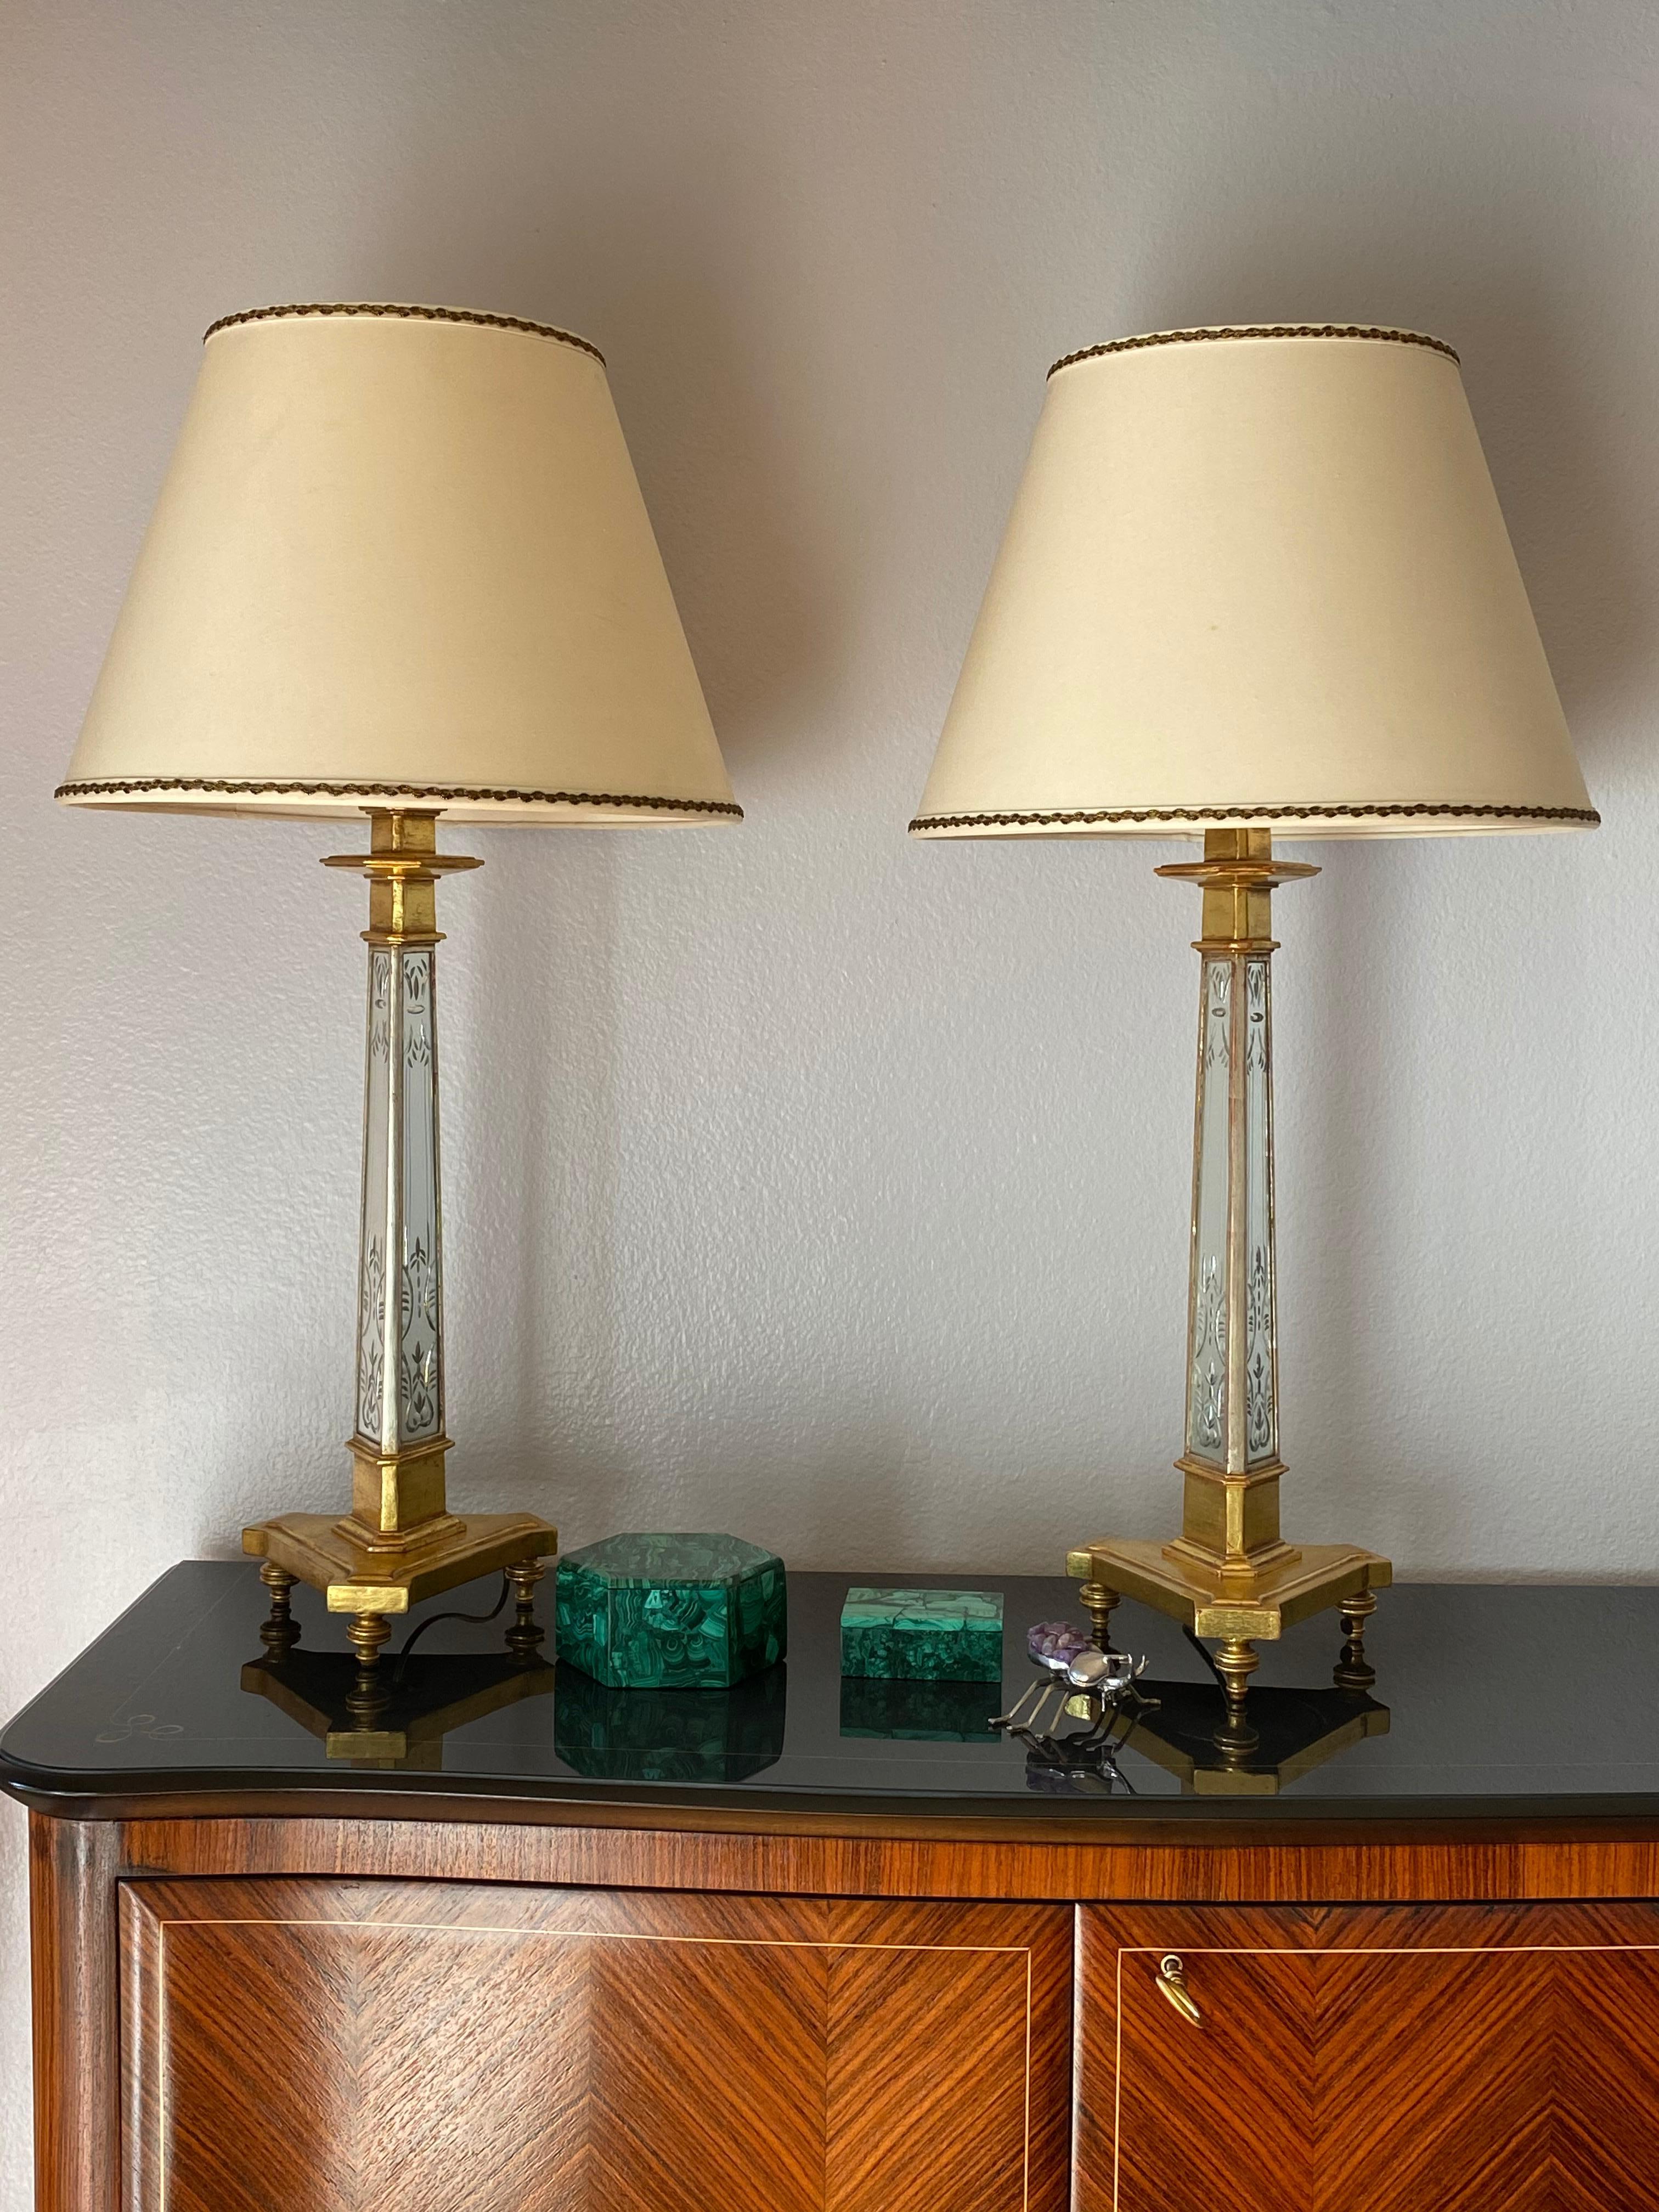 Pair of 22-karat gold leaf and etched mirror lamps with original shades. Shade is 16